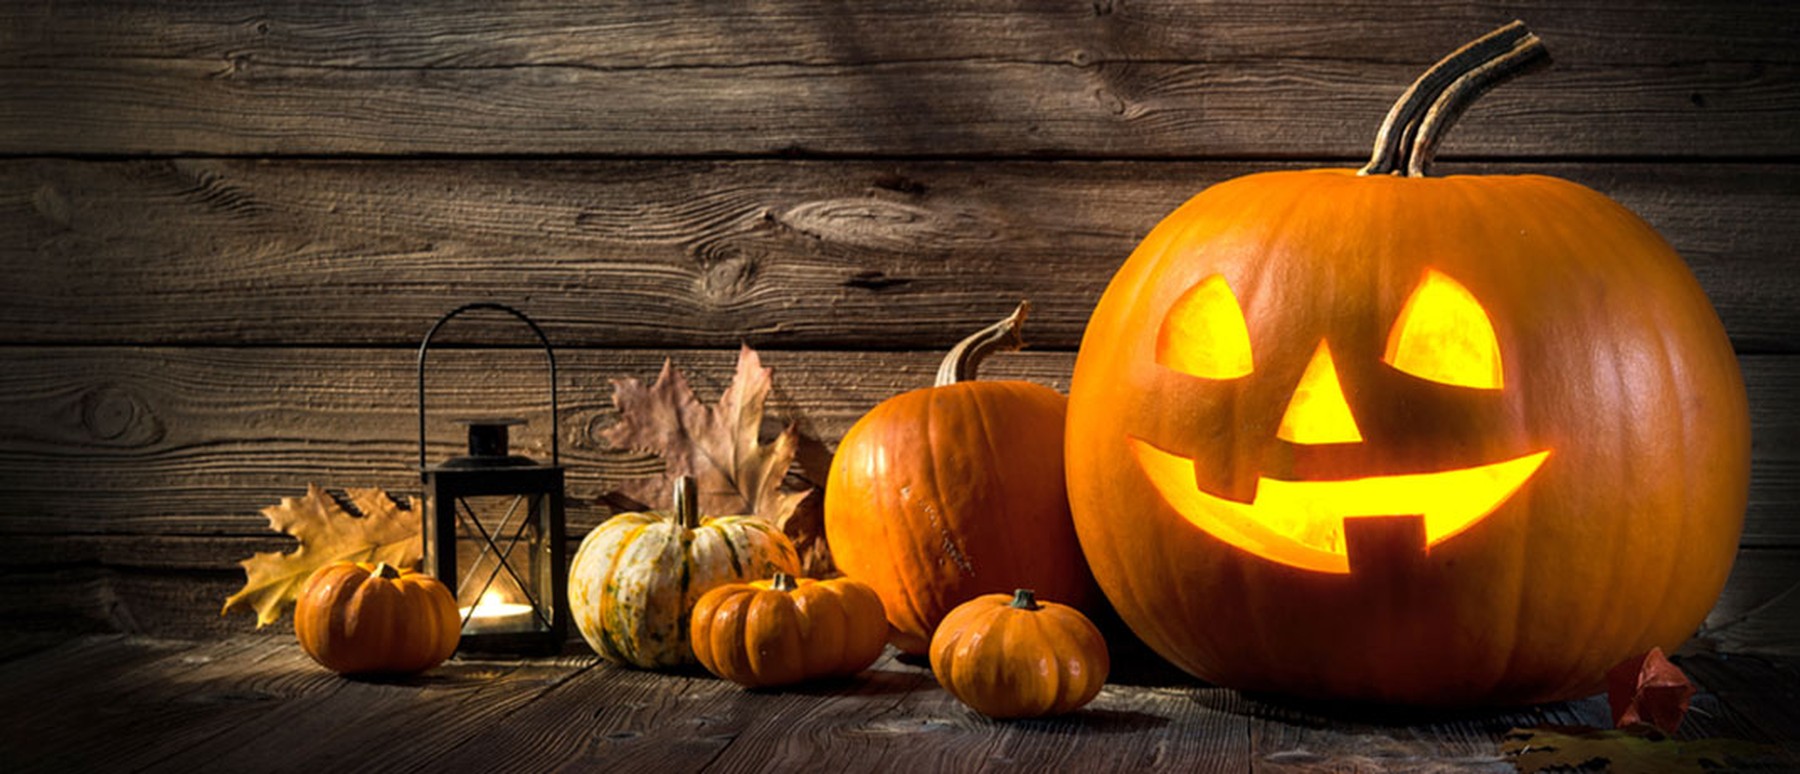 Frightfully easy ways to save on Halloween costumes, decorations, and candy